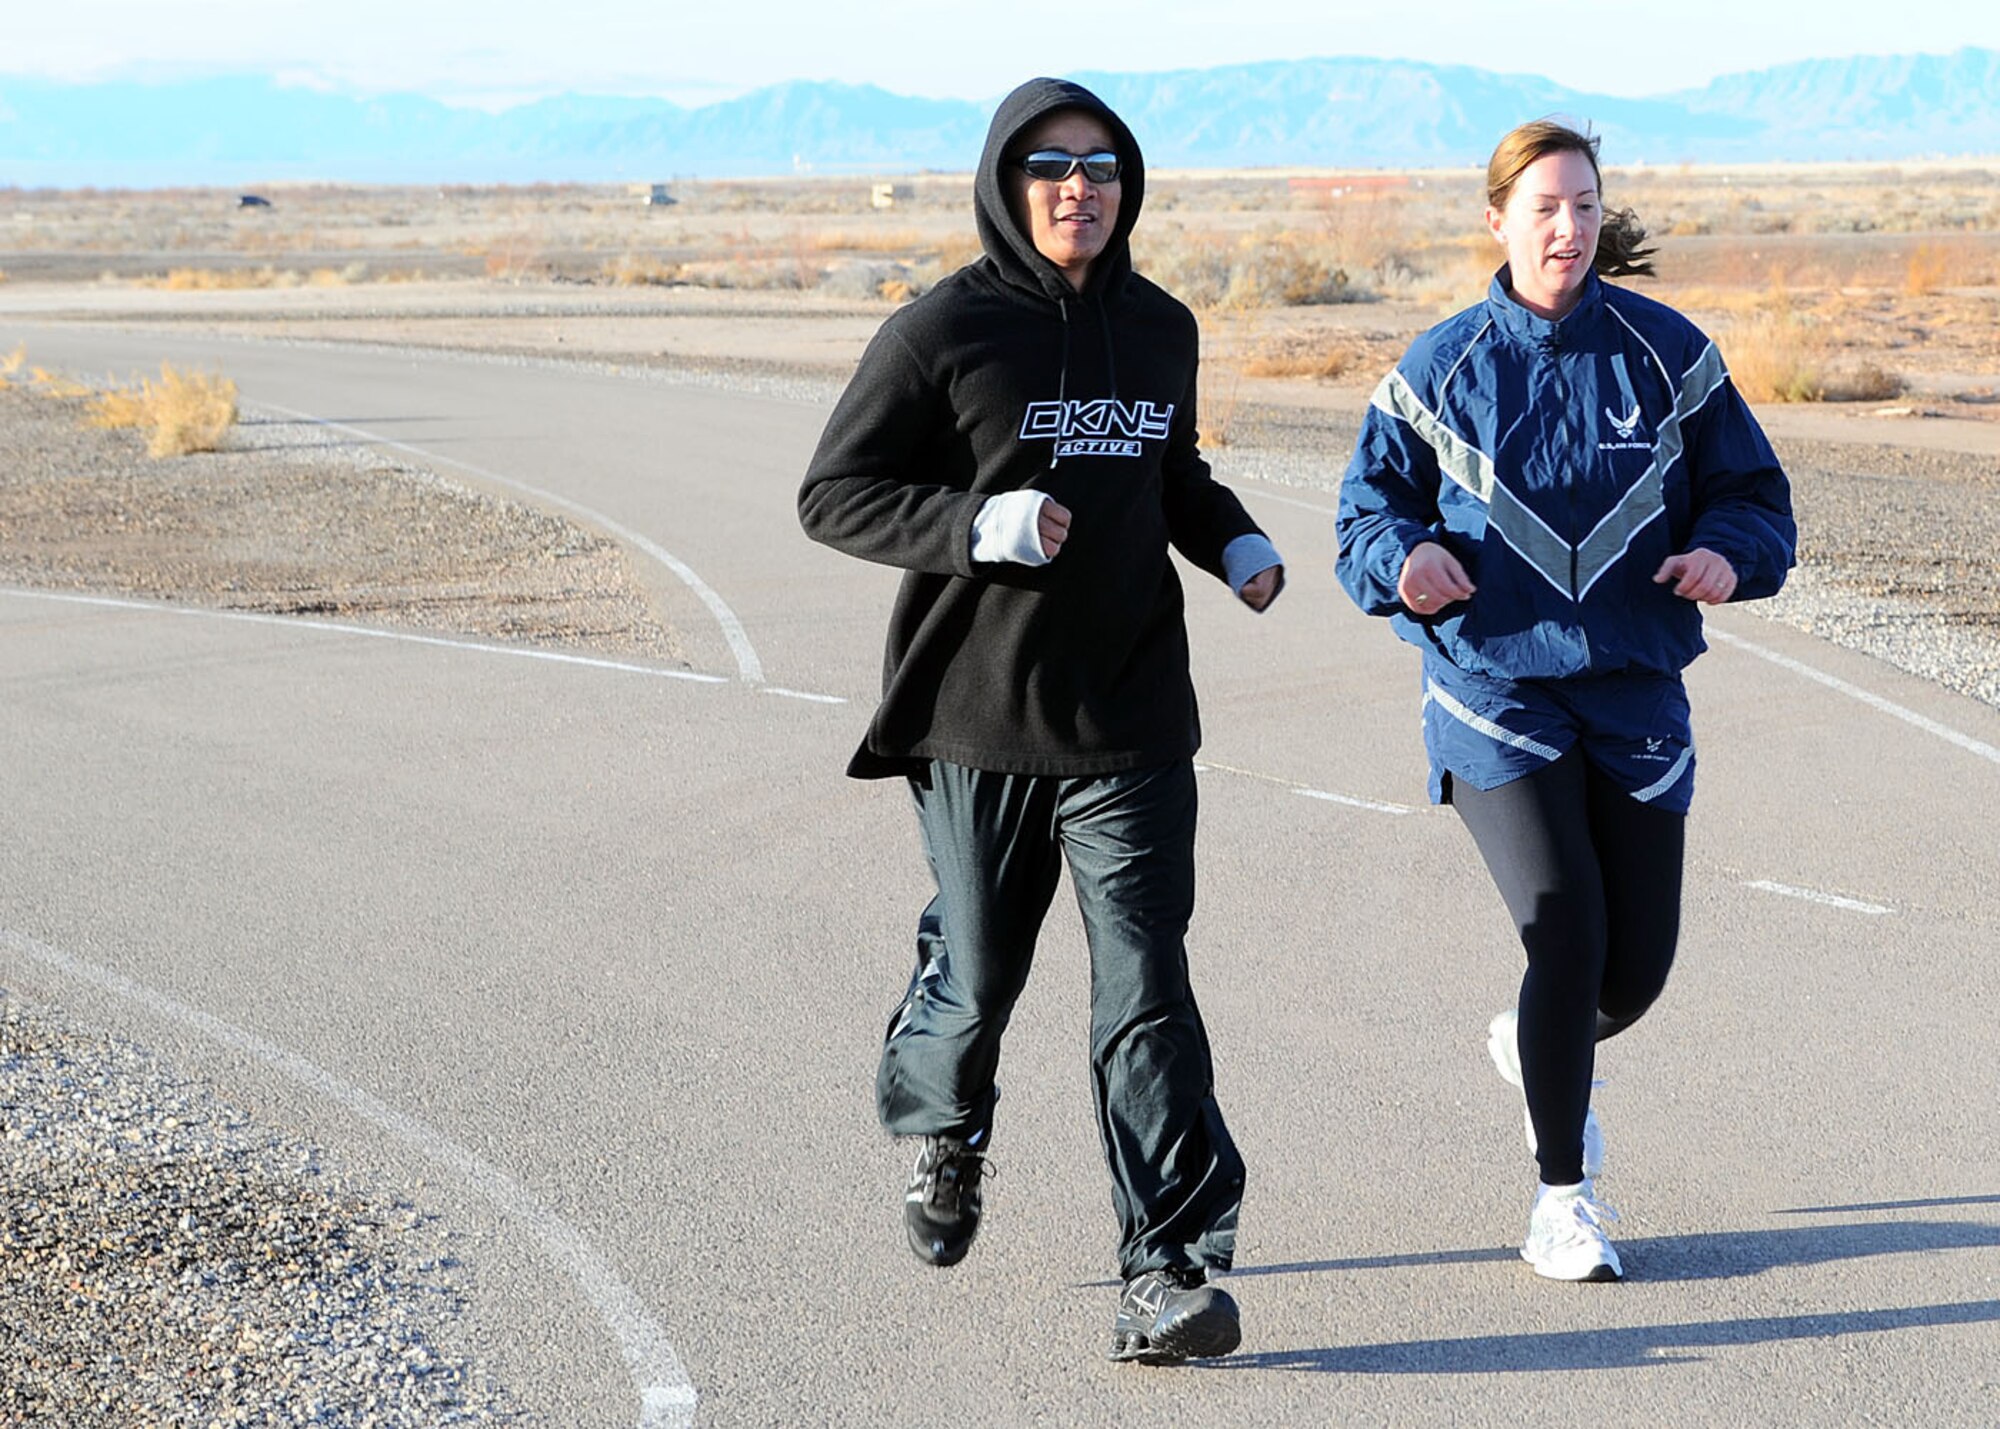 Participants in the Holloman Air Force Base, N.M., Frosty 5k run round out their last lap around the track at the Fitness and Sports Center Dec. 19. The Frosty 5k run was the 12th and last run of 2008. (U.S Air Force photo/ Airman 1st Class DeAndre Curtiss)